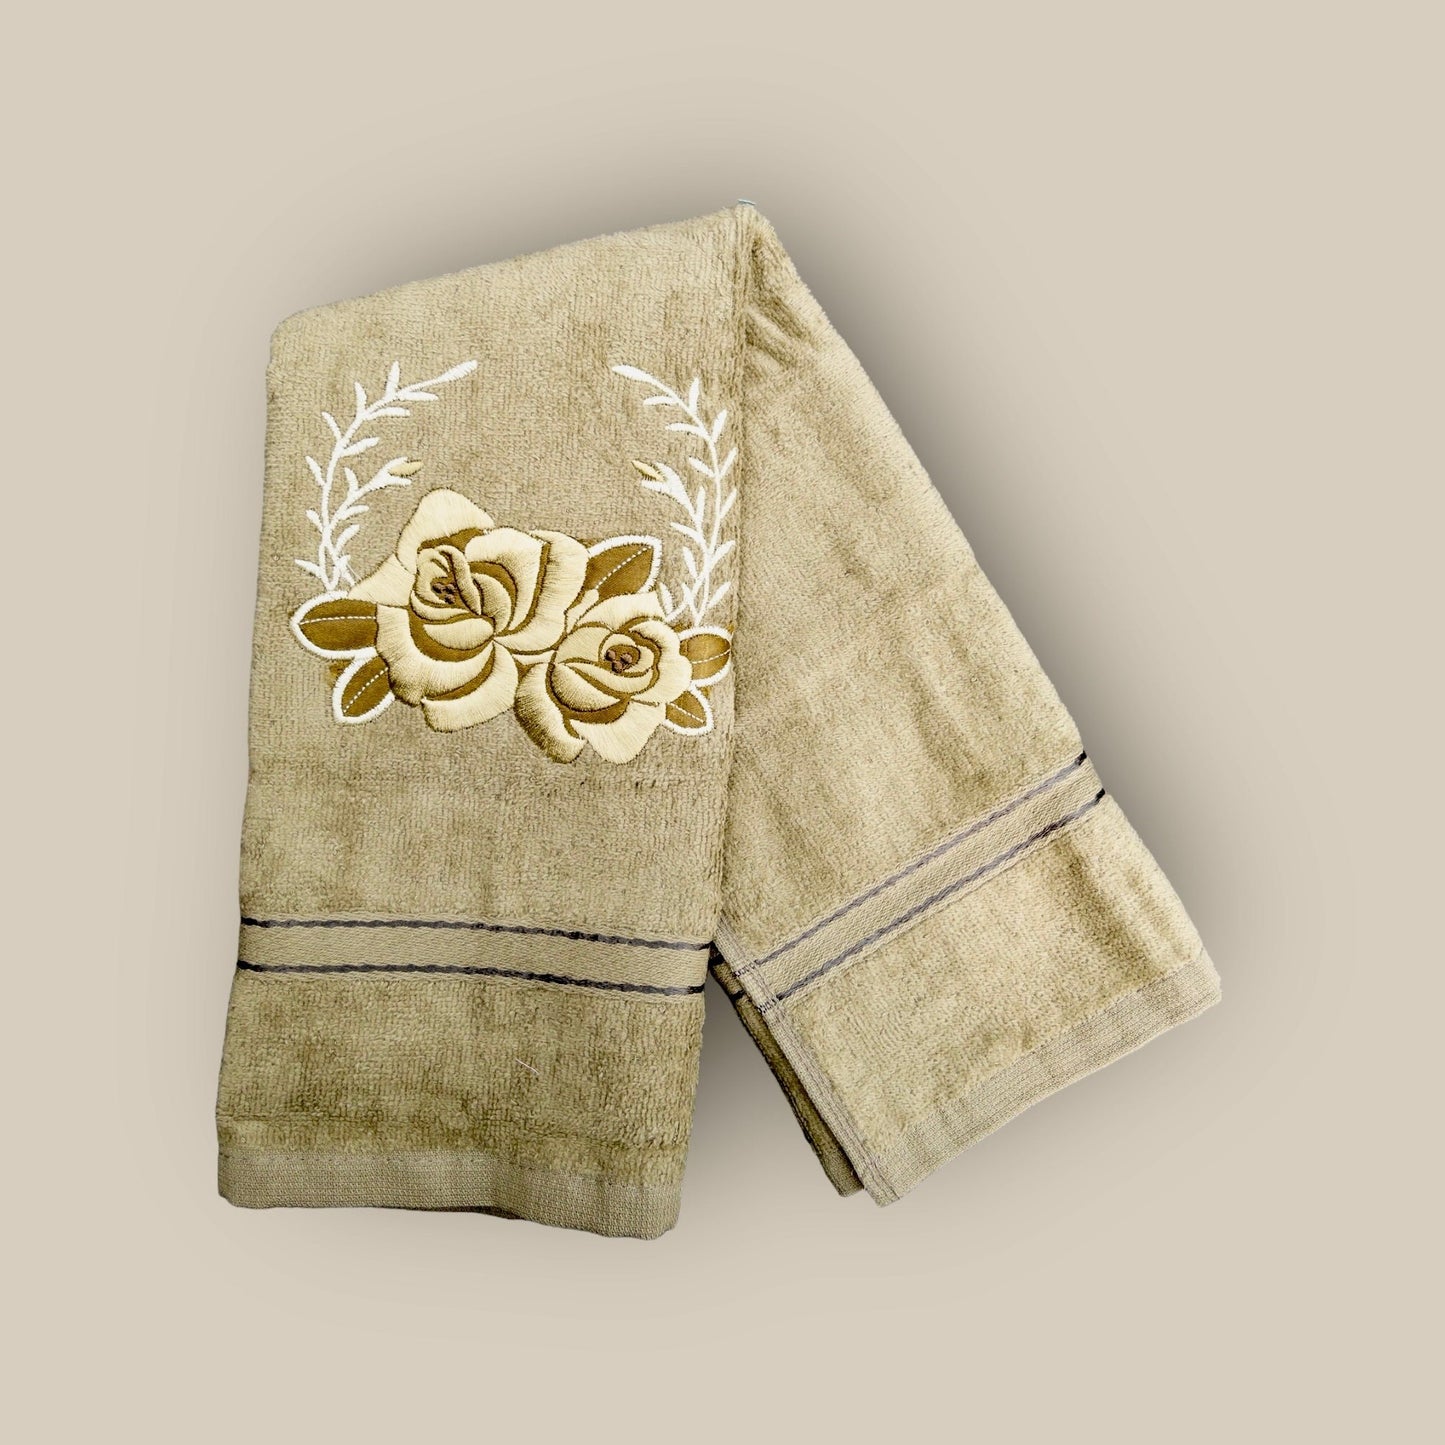 olive green hand towel with floral embroidery